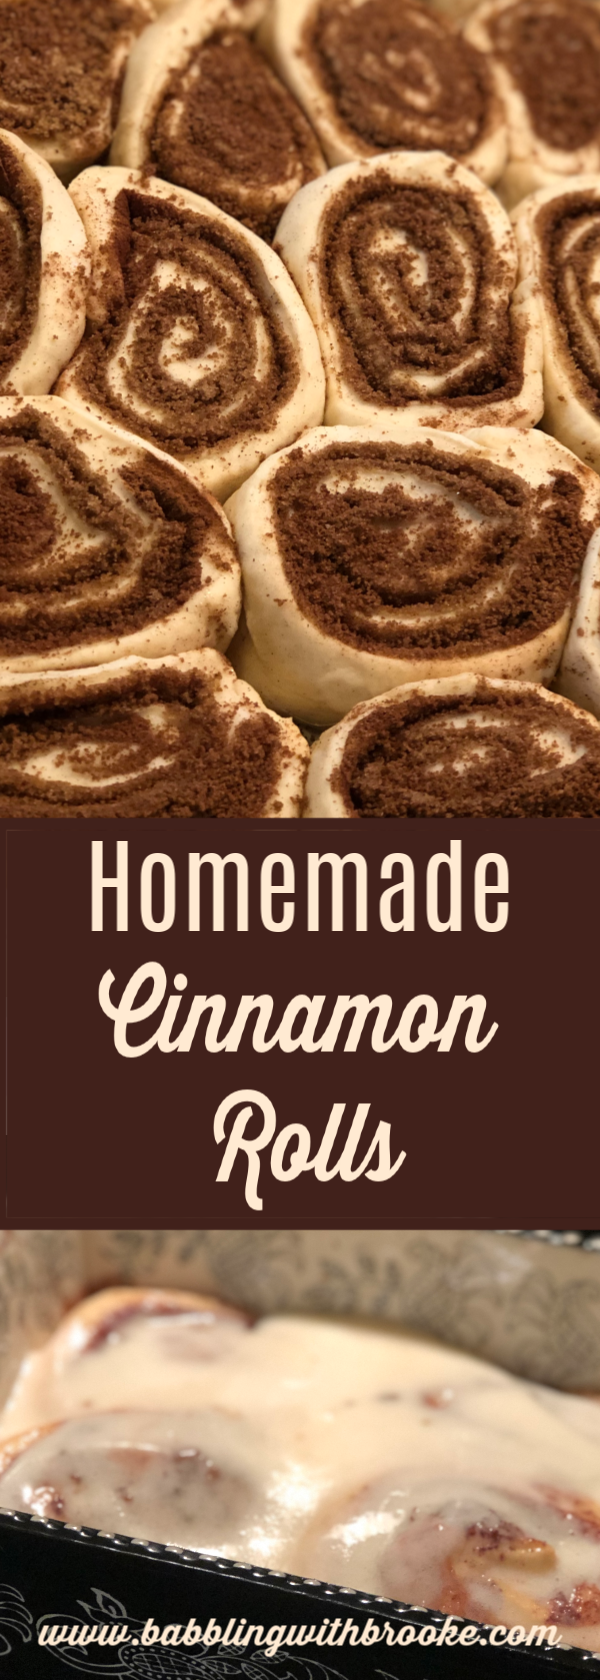 The perfect homemade cinnamon rolls that everyone will love! Trust me, I have never had a single complaint about these delicious cinnamon rolls. #homemadecinnamonrolls #cinnamonrolls #creamcheeseicing #homemade #dessertforbreakfast